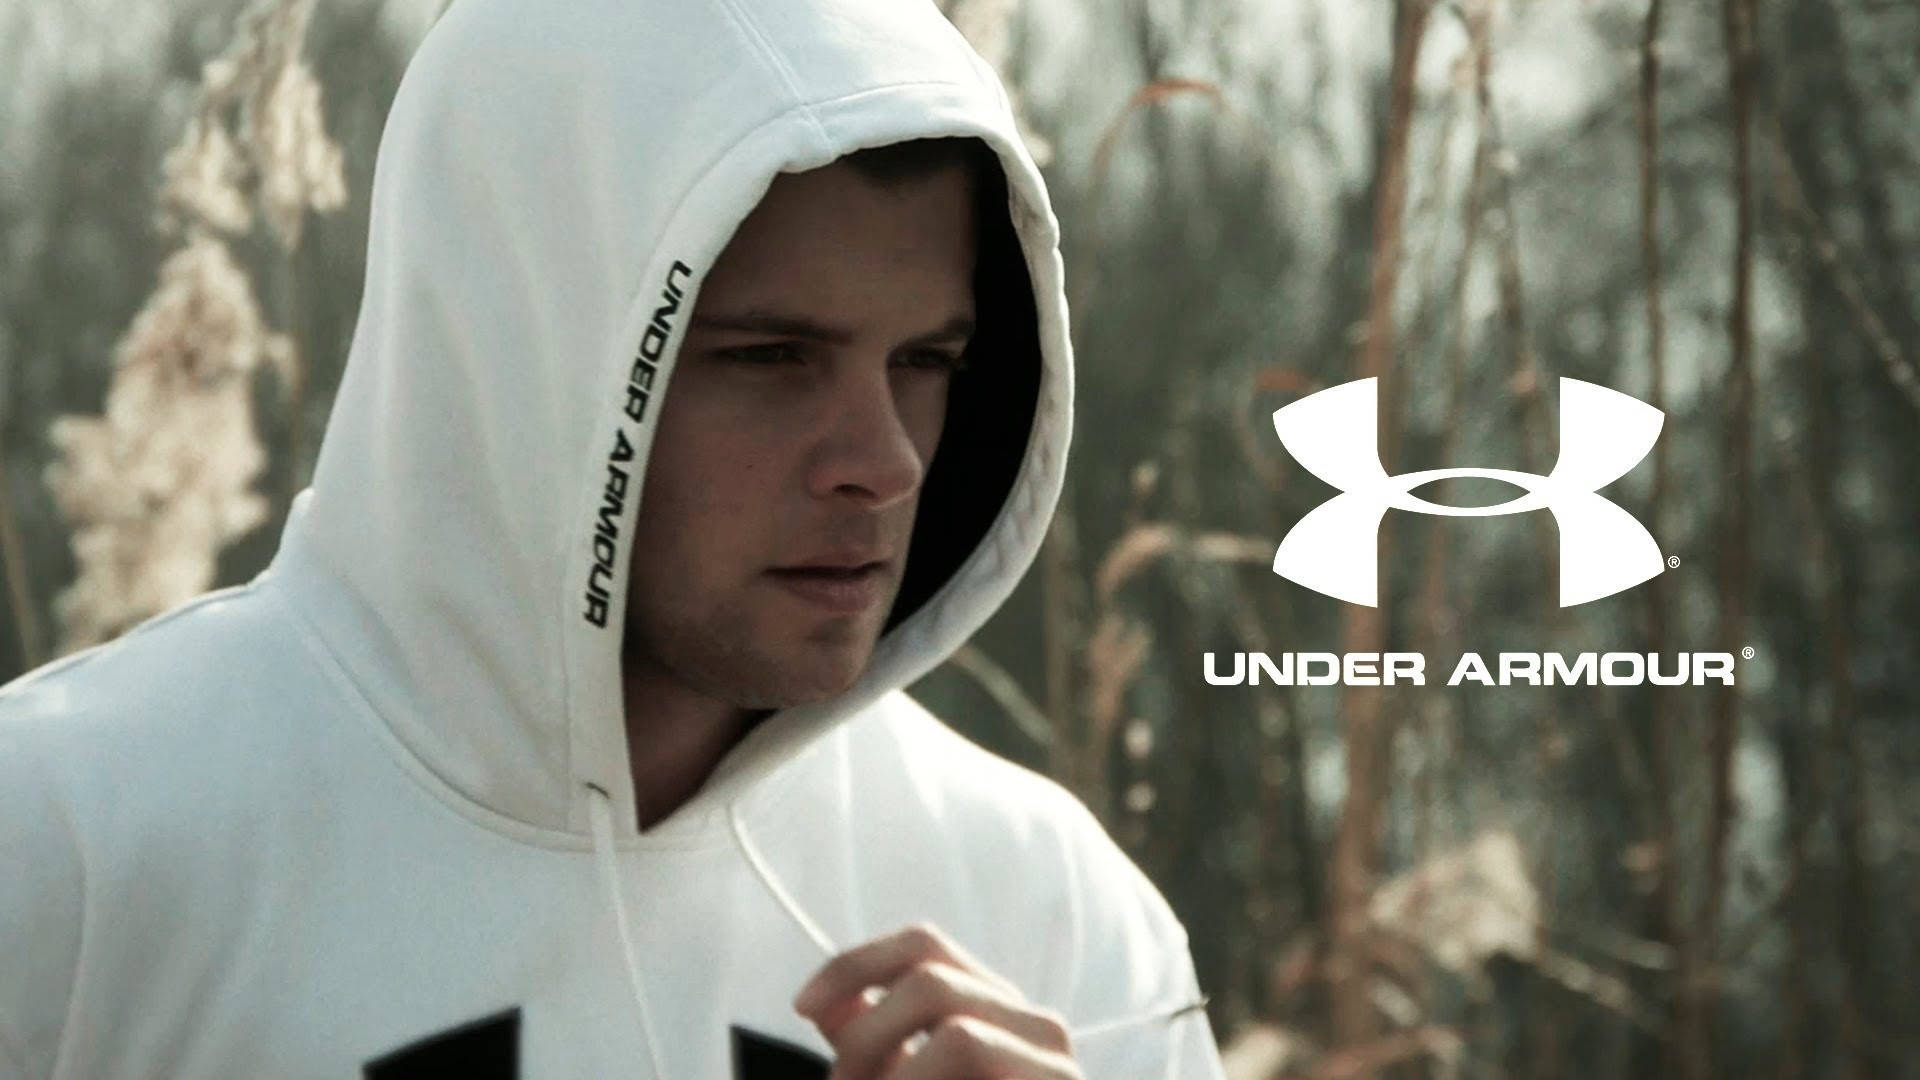 Under Armour Promotional Poster